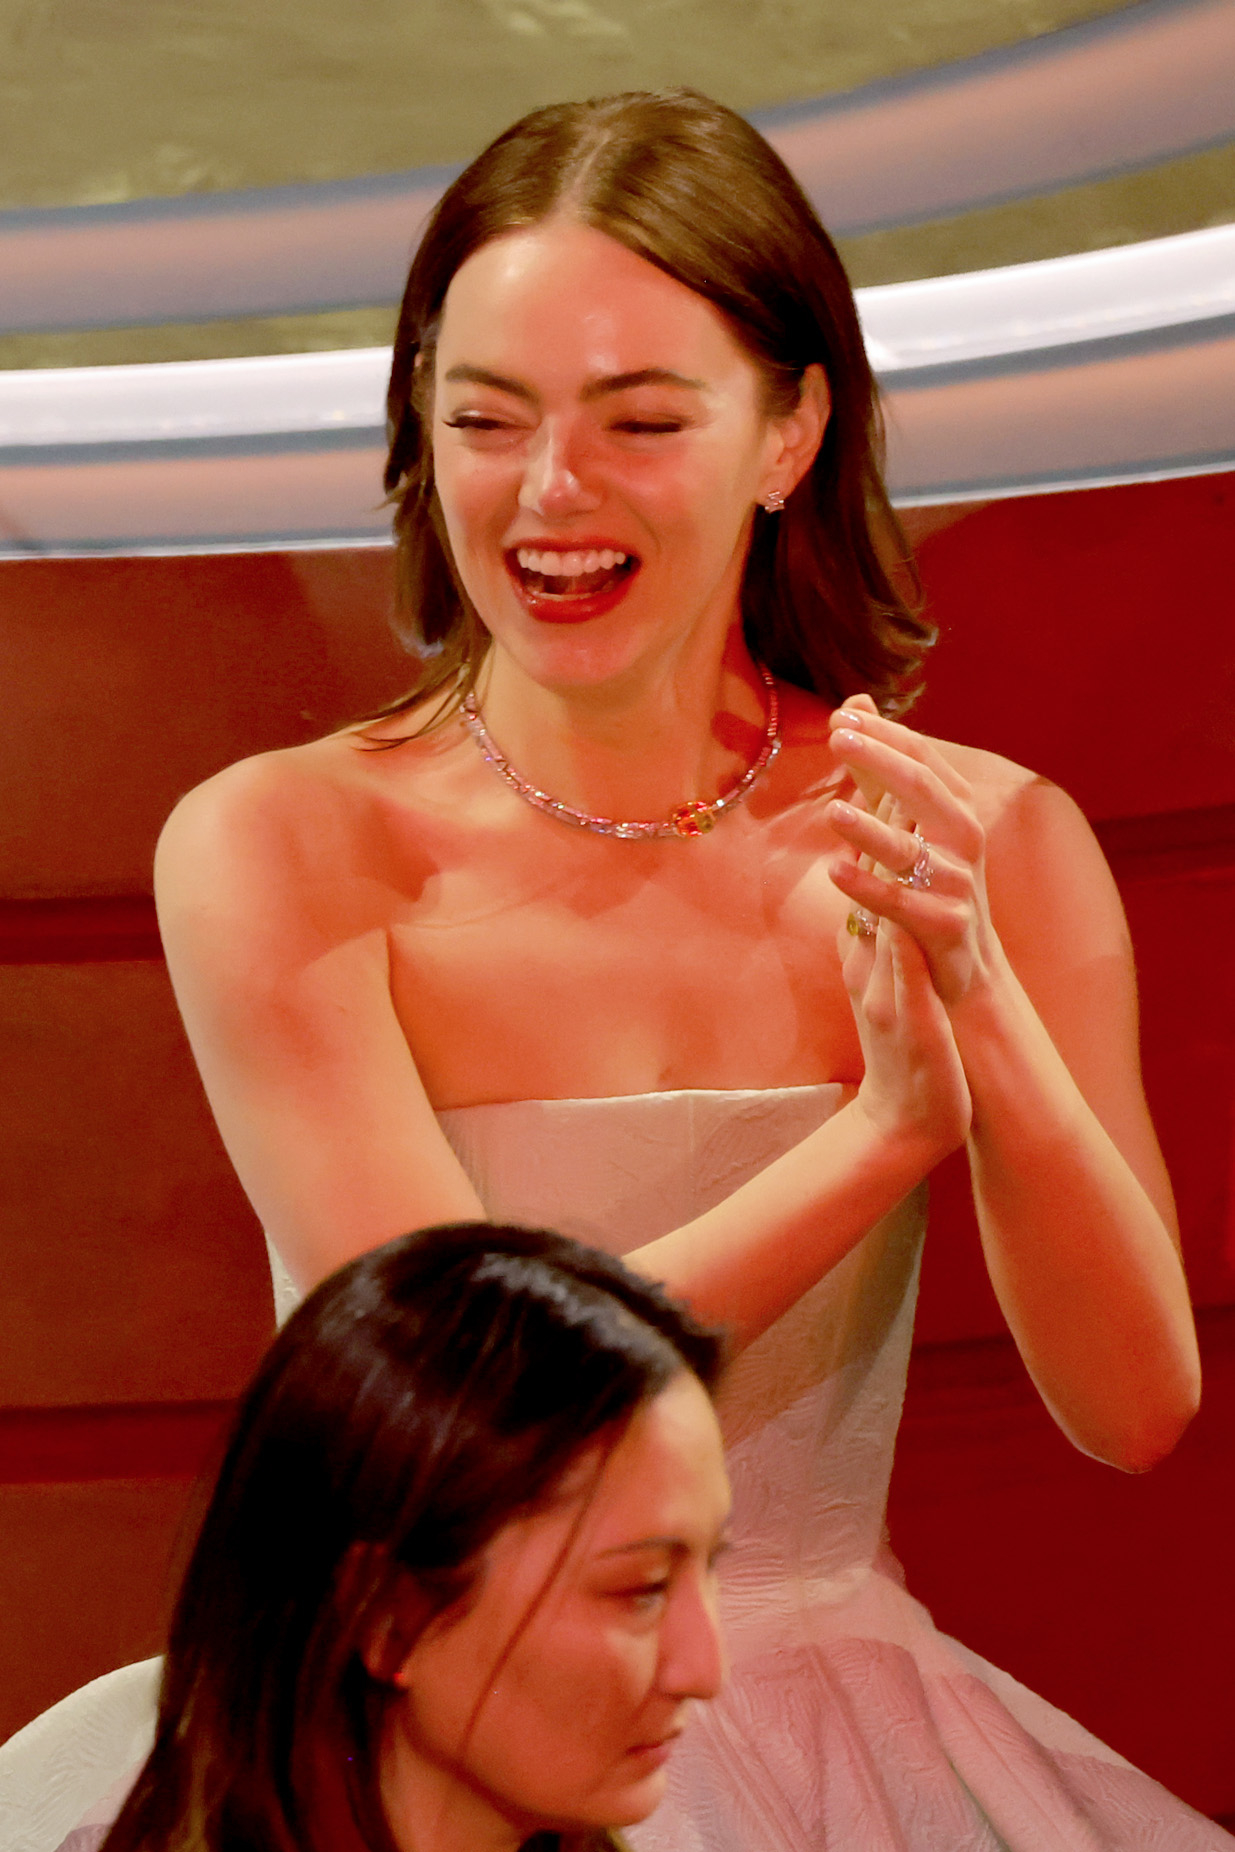 Emma Stone in a strapless gown laughing and clapping